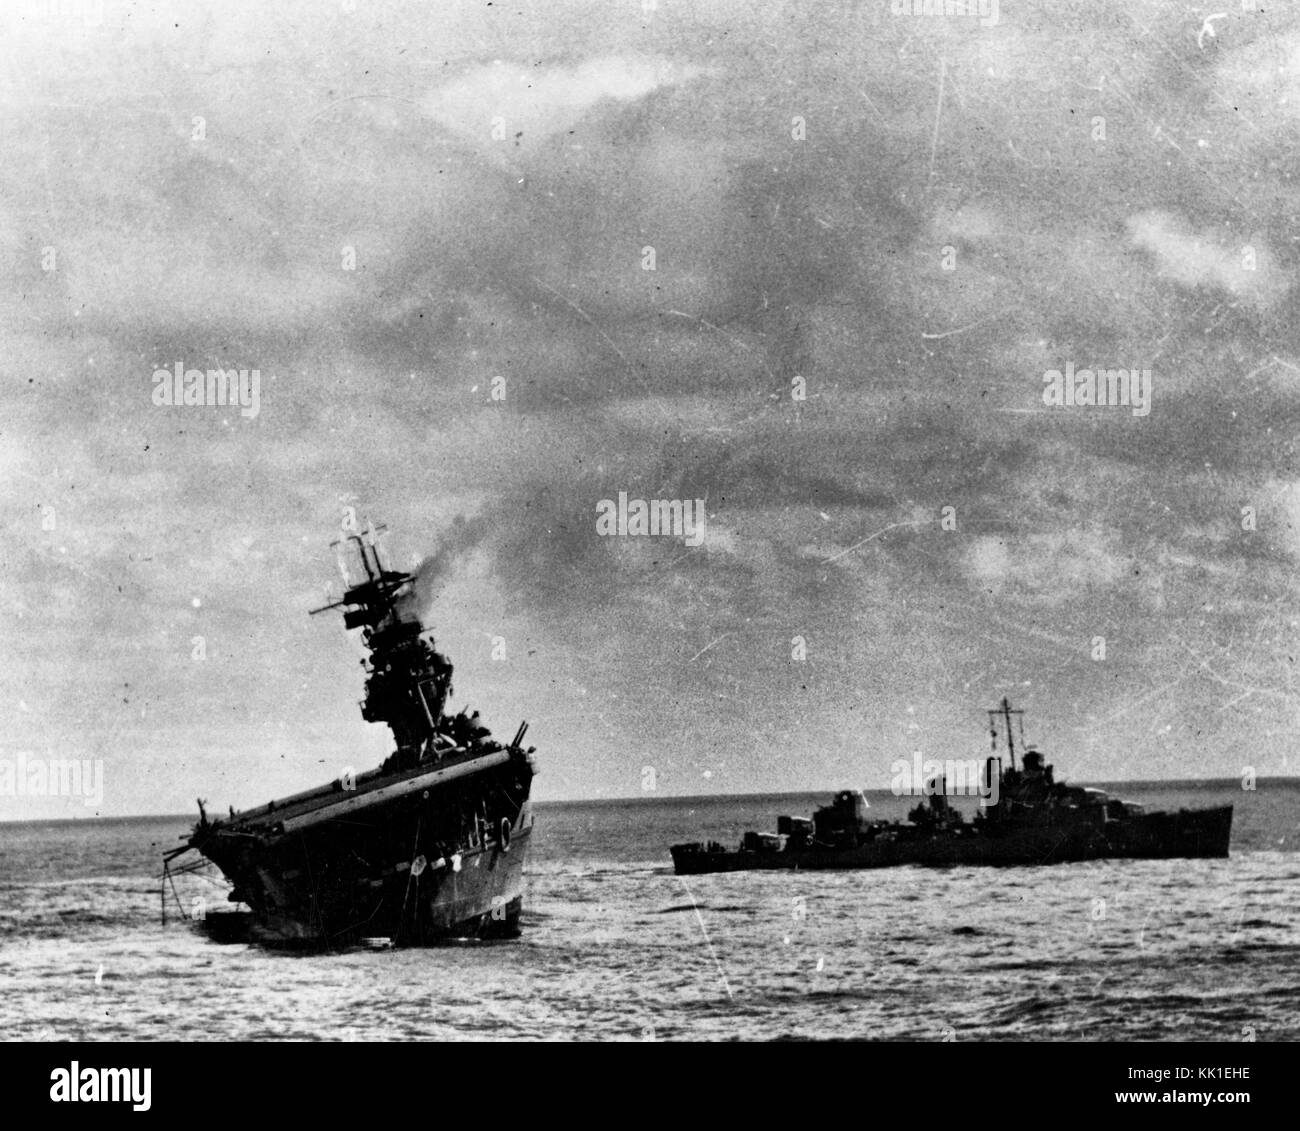 USS Yorktown (CV-5) being abandoned by her crew after she was hit by two Japanese Type 91 aerial torpedoes, 4 June 1942. USS Balch (DD-363) is standing by at right. Note oil slick surrounding the damaged carrier, and inflatable life raft being deployed off her stern. Stock Photo